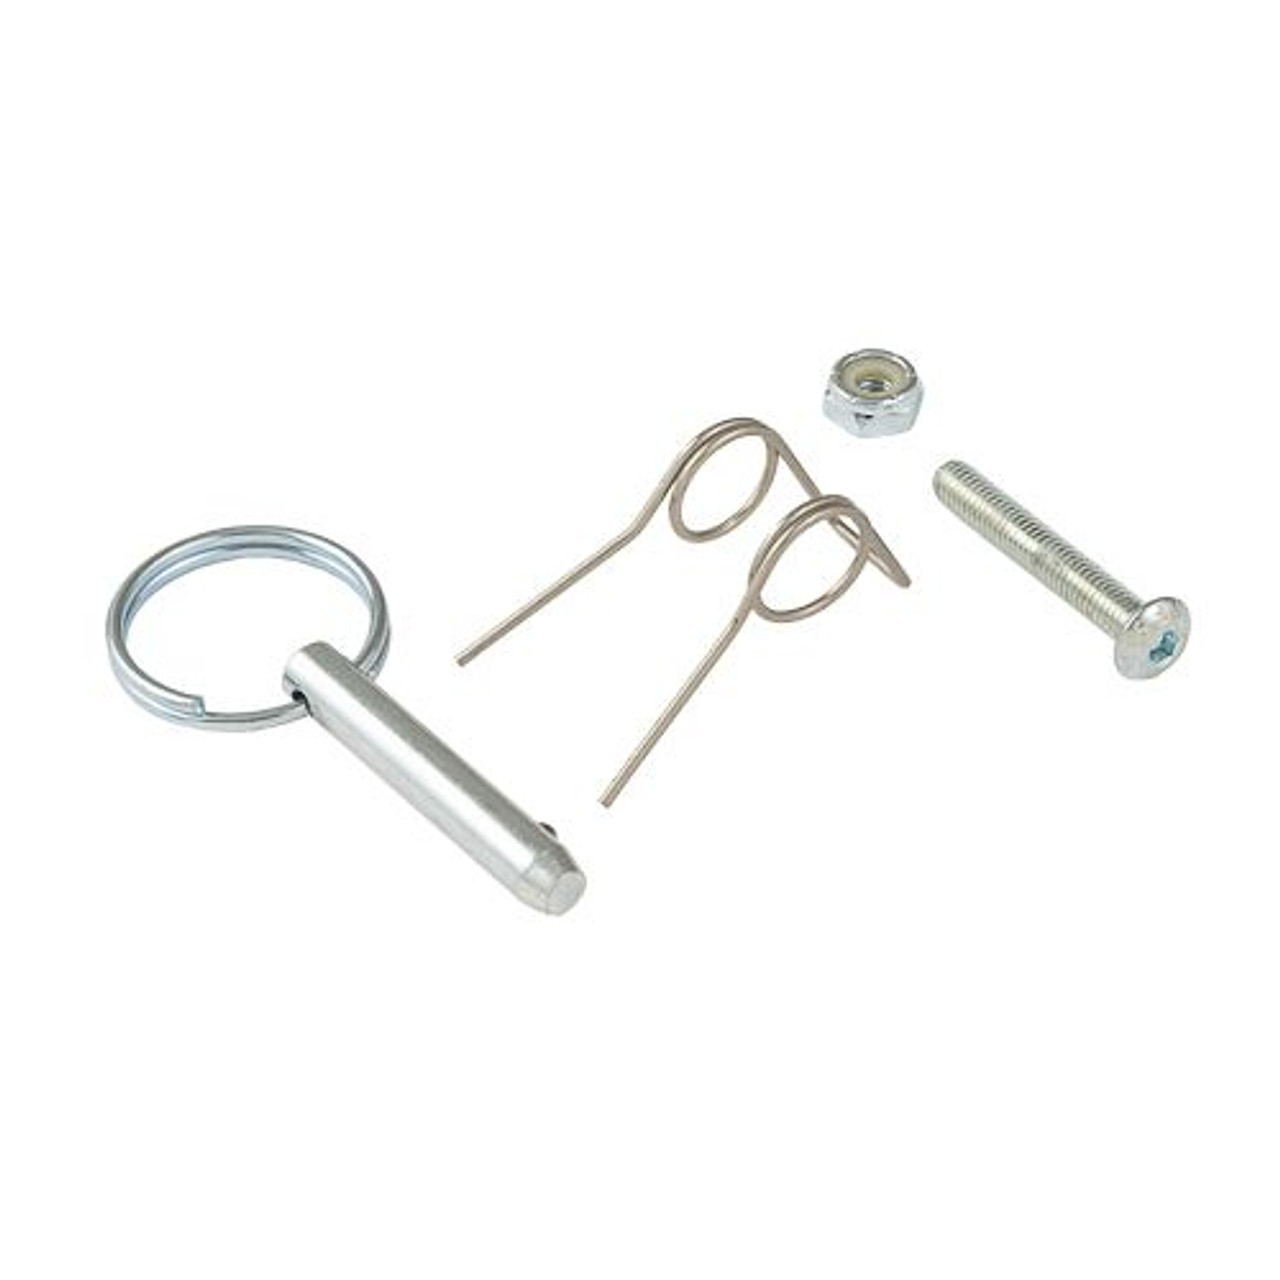 Spring Latches - Lifting & Rigging Hardware - Slings, Lifting